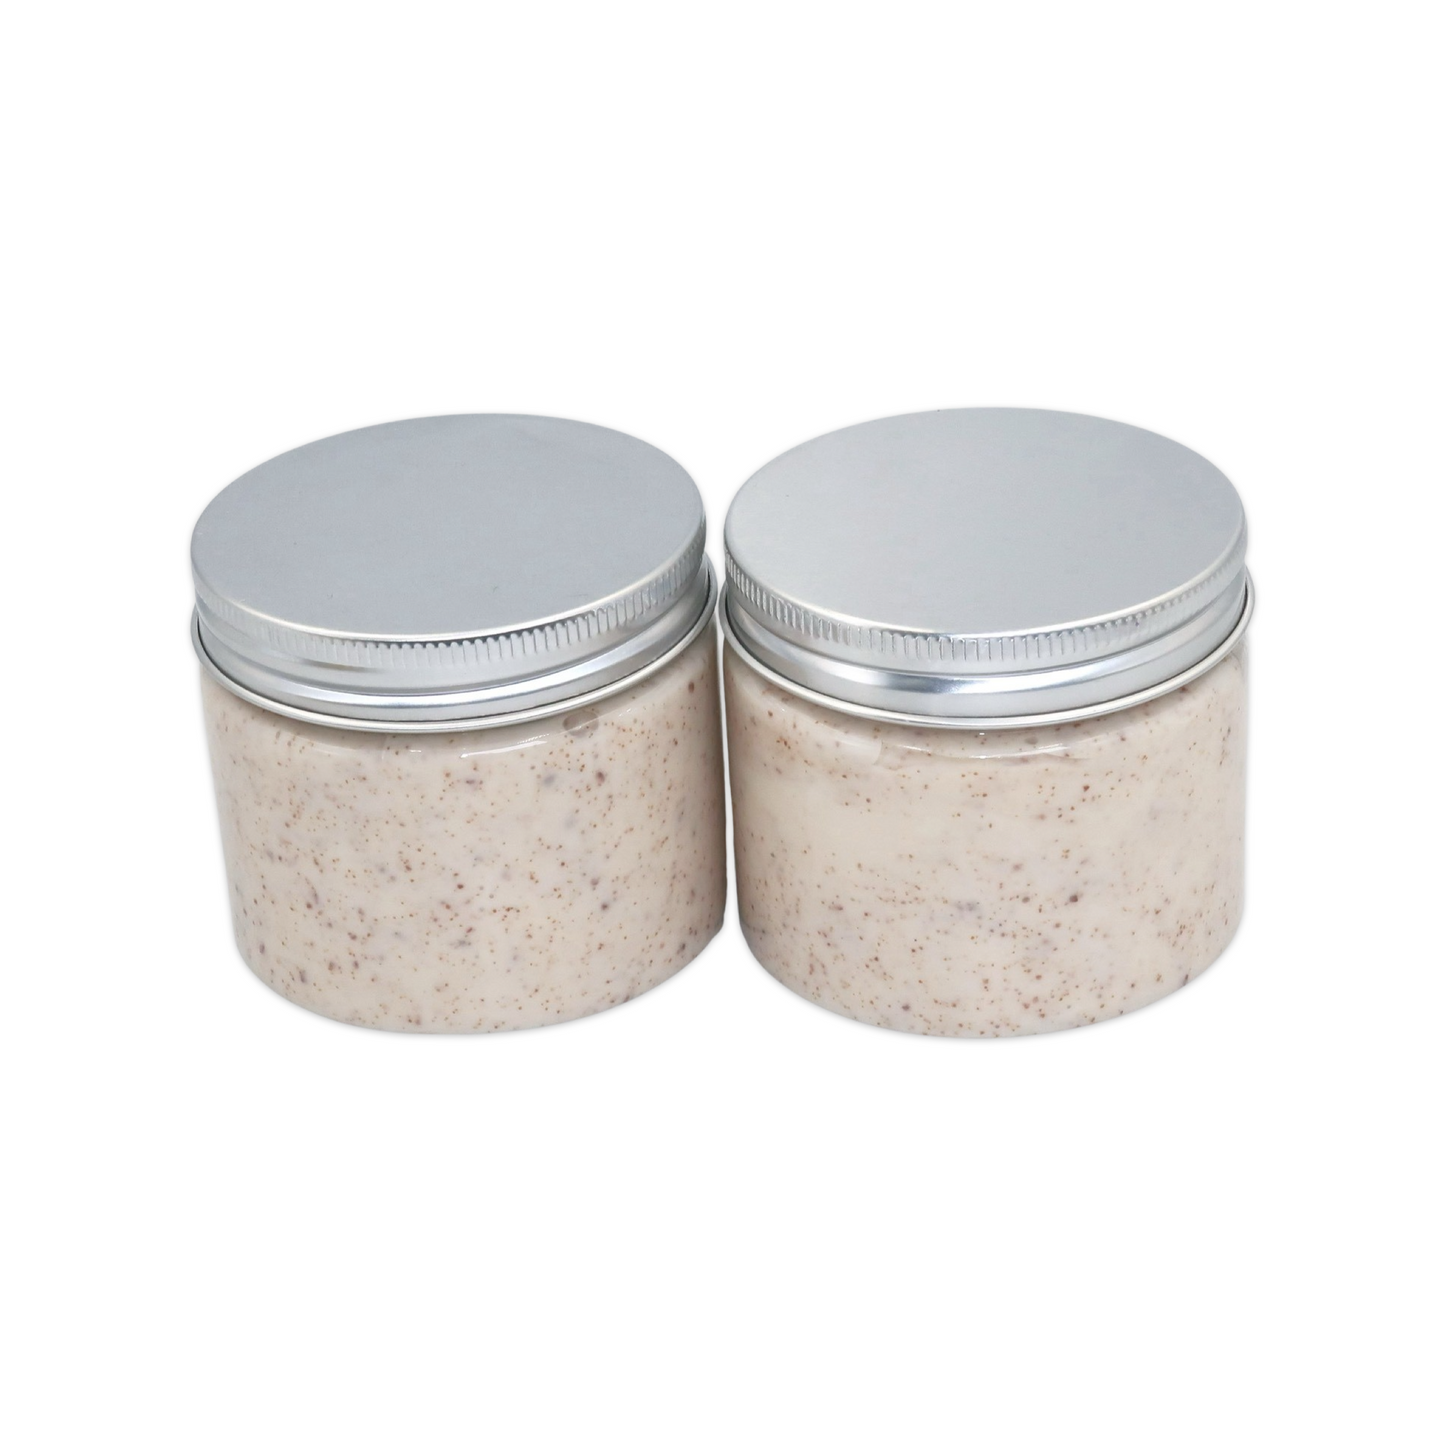 Facial scrub for clear and glowing skin enriched with licorice root and niacinamide